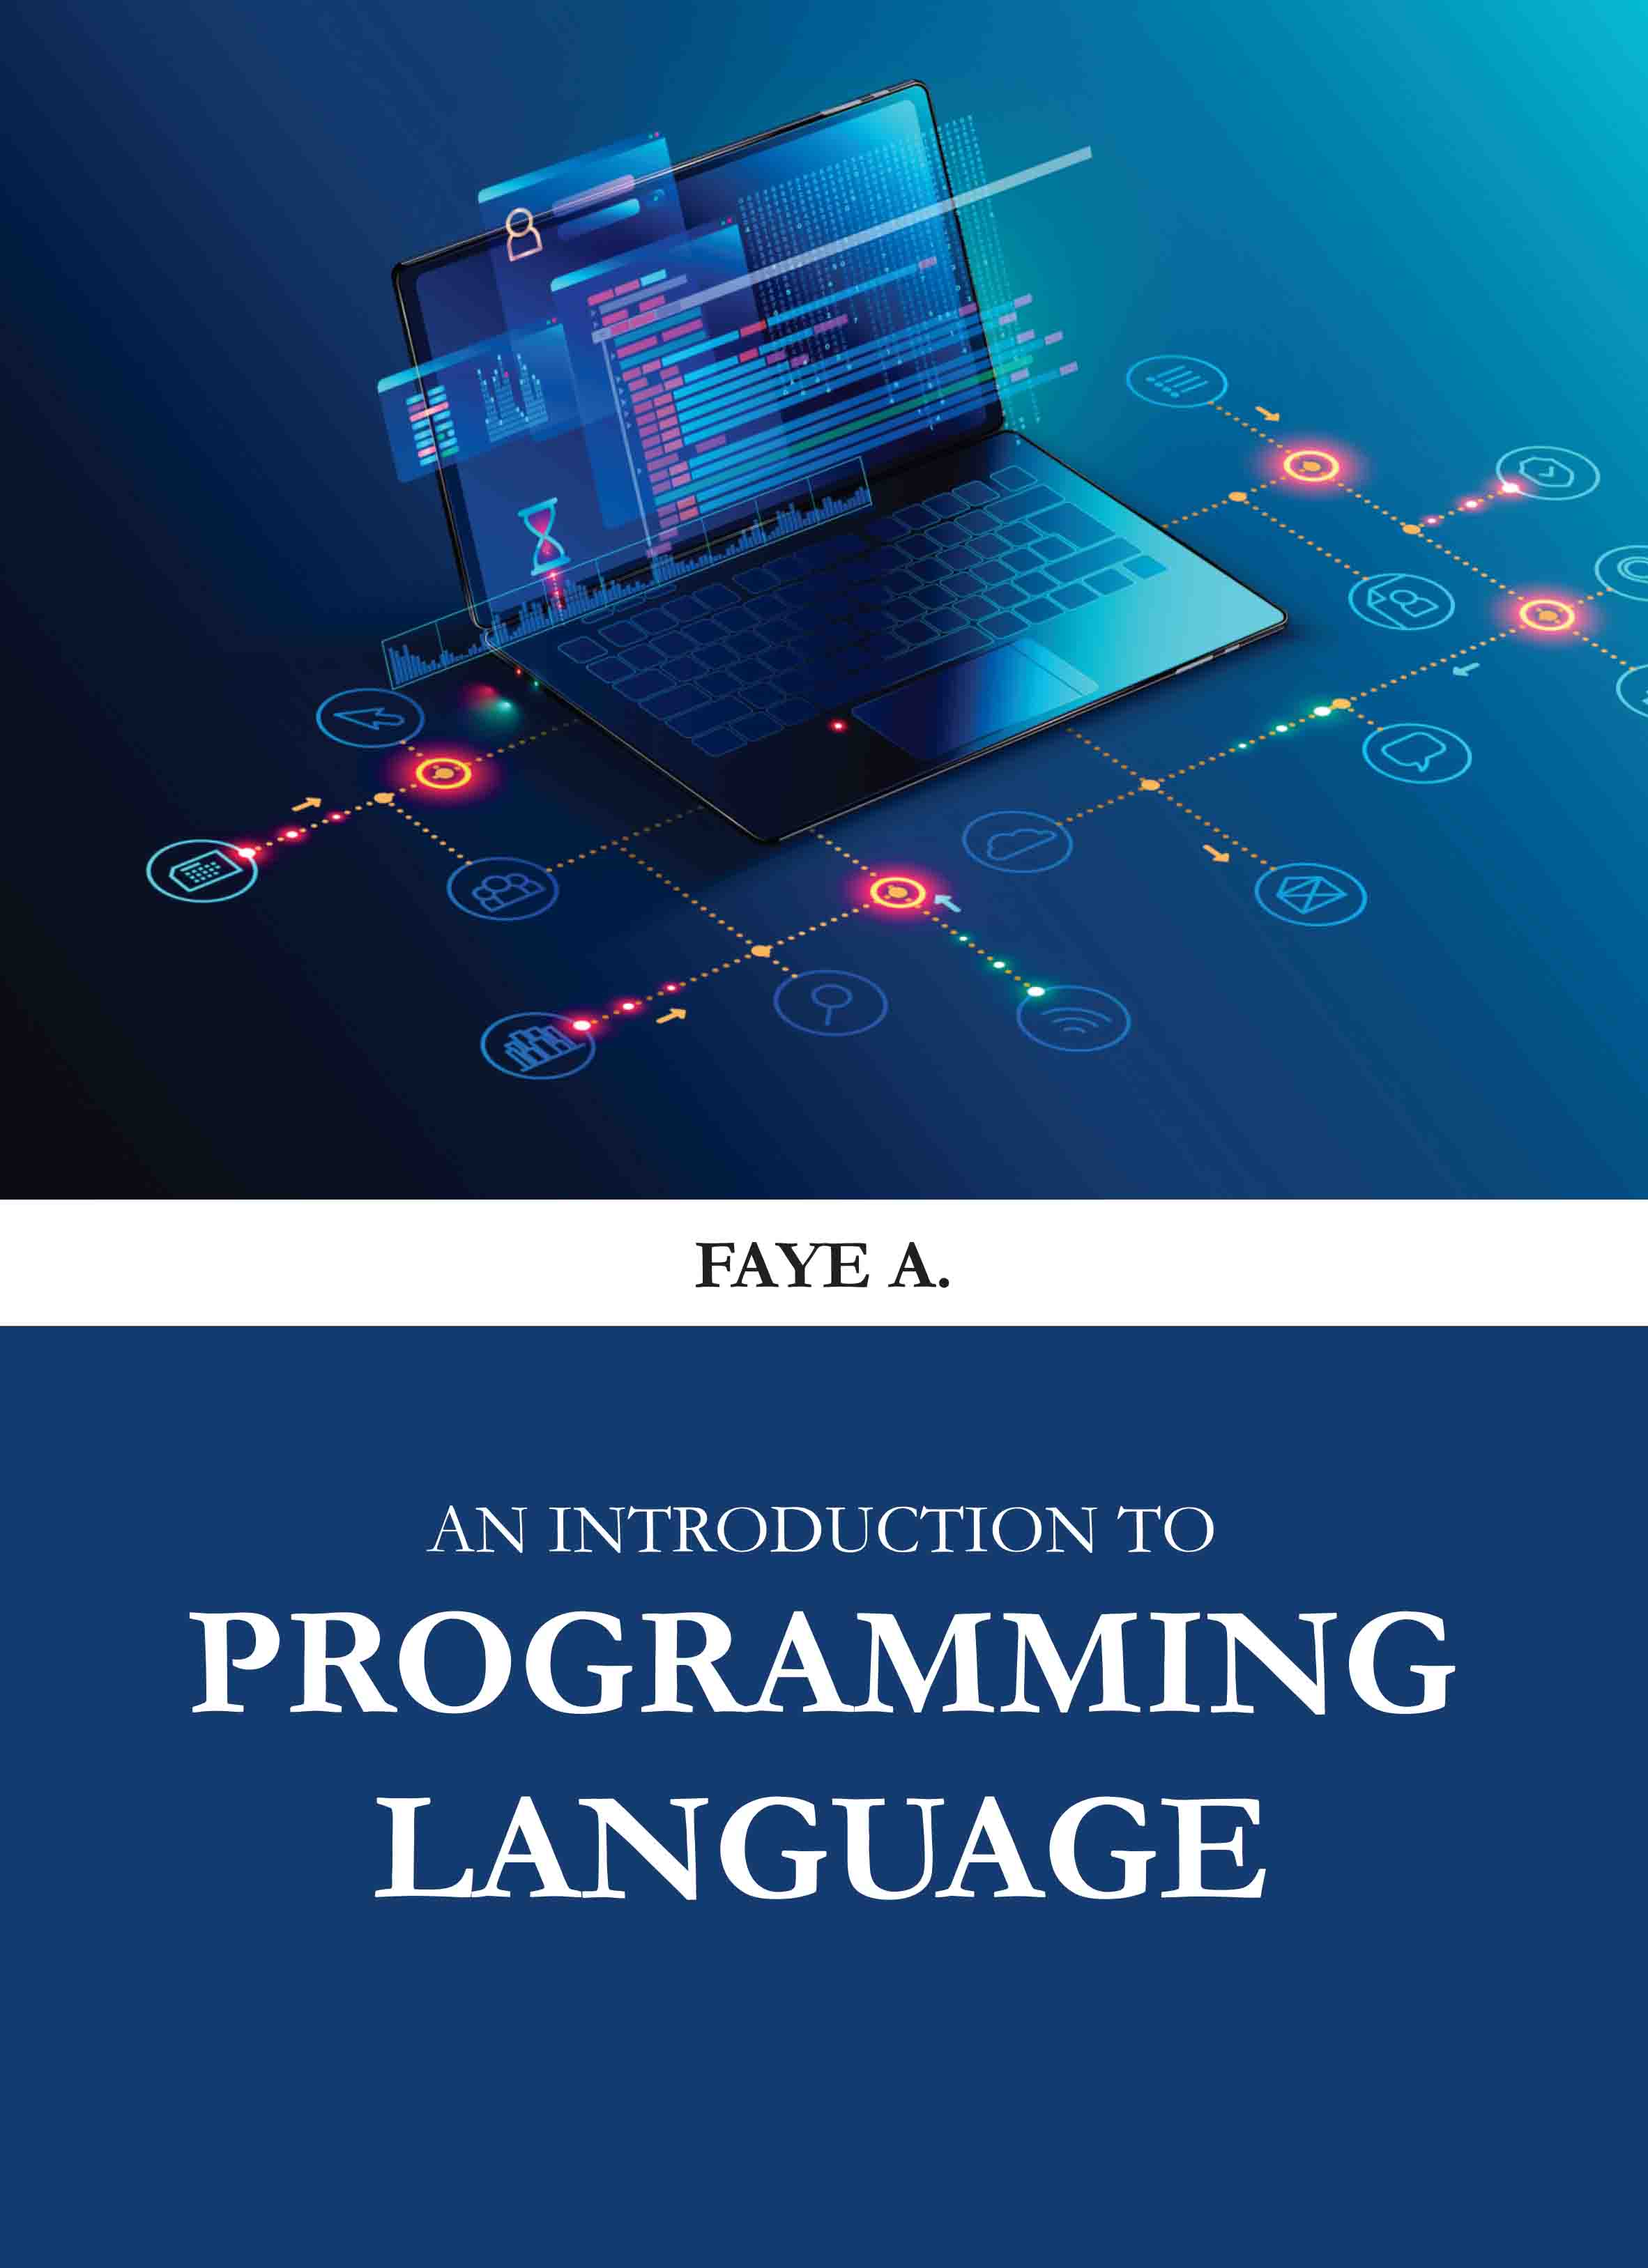 An Introduction to Programming Language